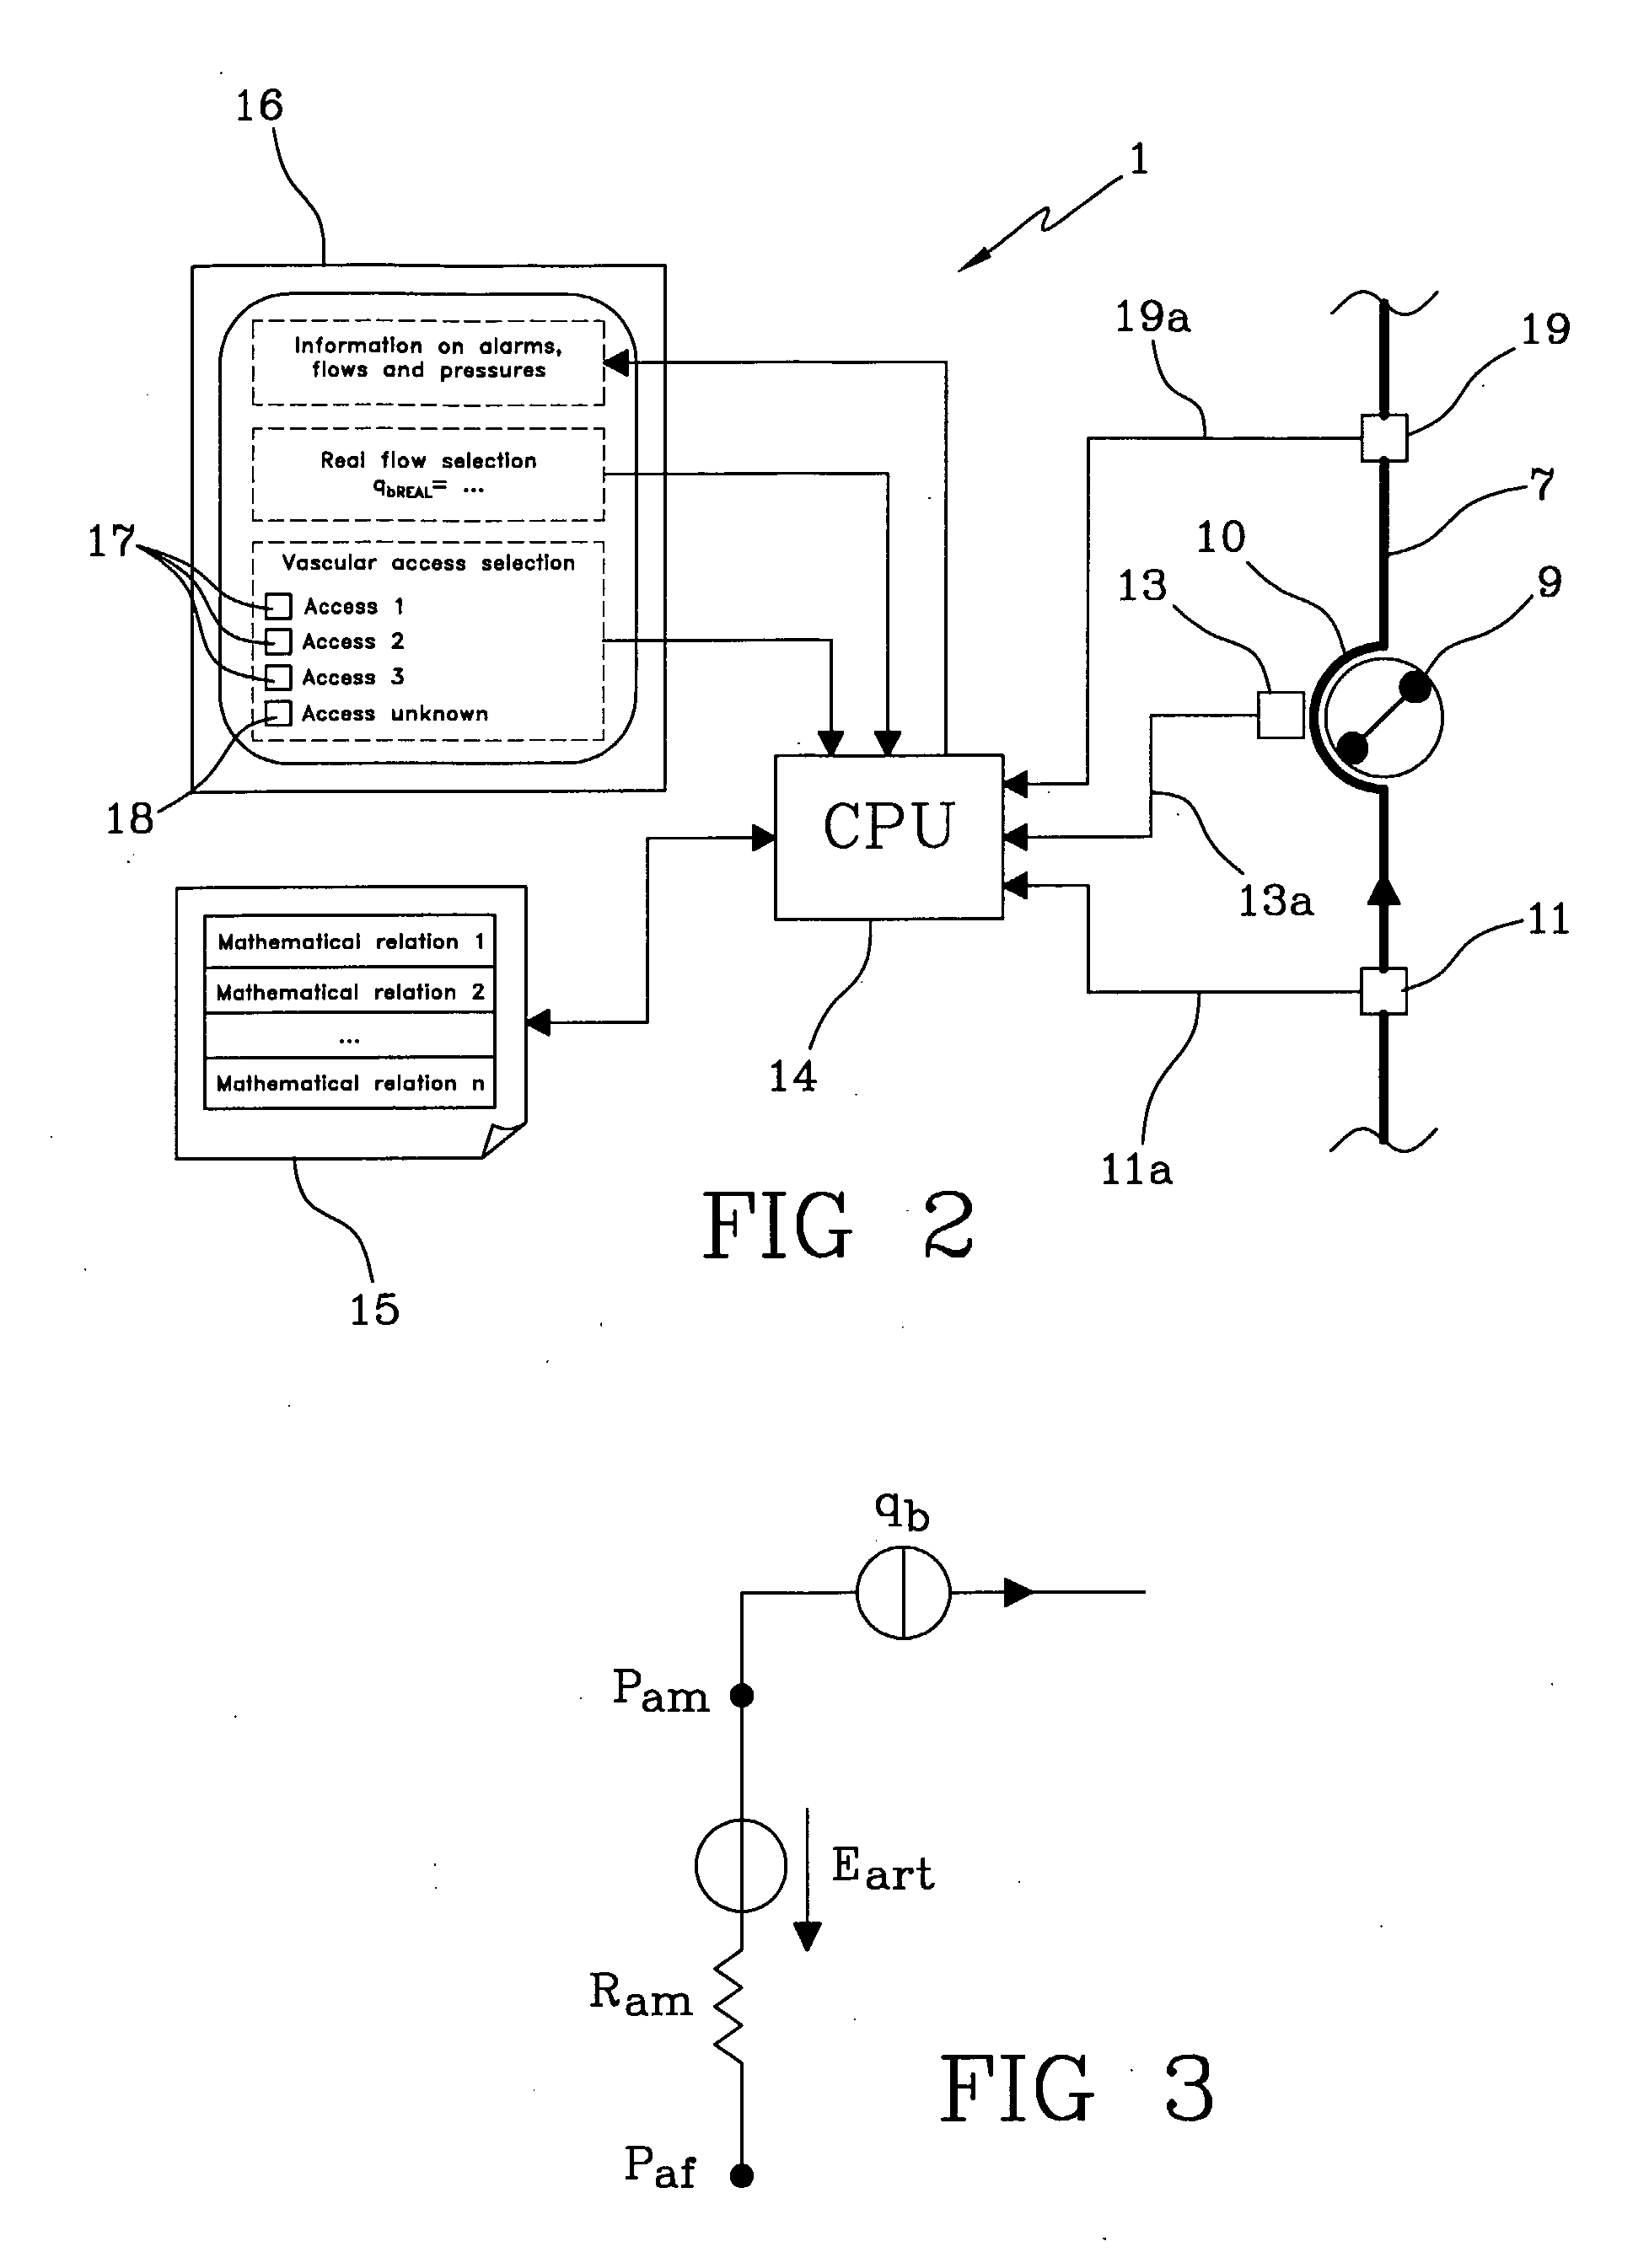 Apparatus for Controlling Blood Flow in an Extracorporeal Circuit